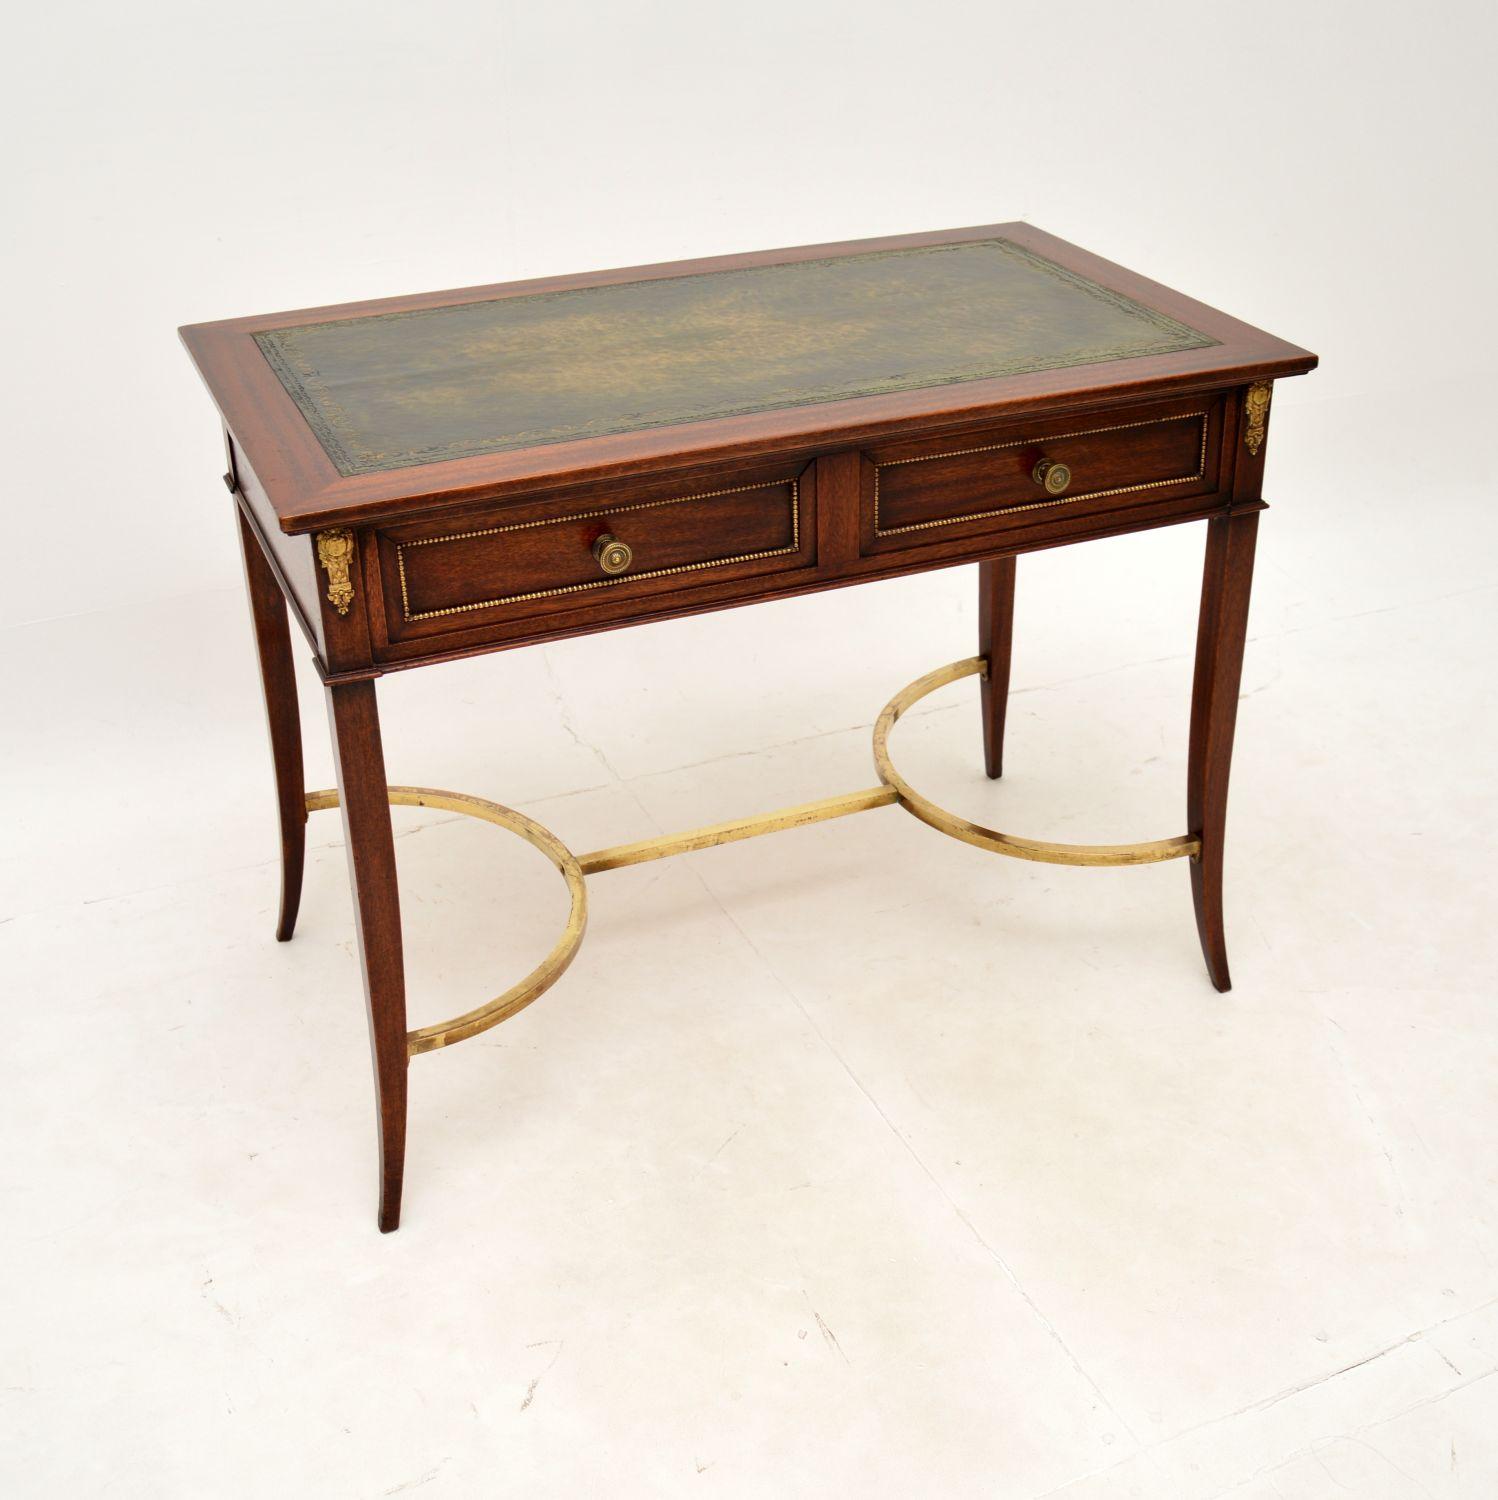 A beautifully designed and extremely well made antique French writing desk. This was made in France, it dates from around the 1930’s.

The quality is outstanding, this has beautiful ormolu mounts, intricate and high quality brass handles and a brass